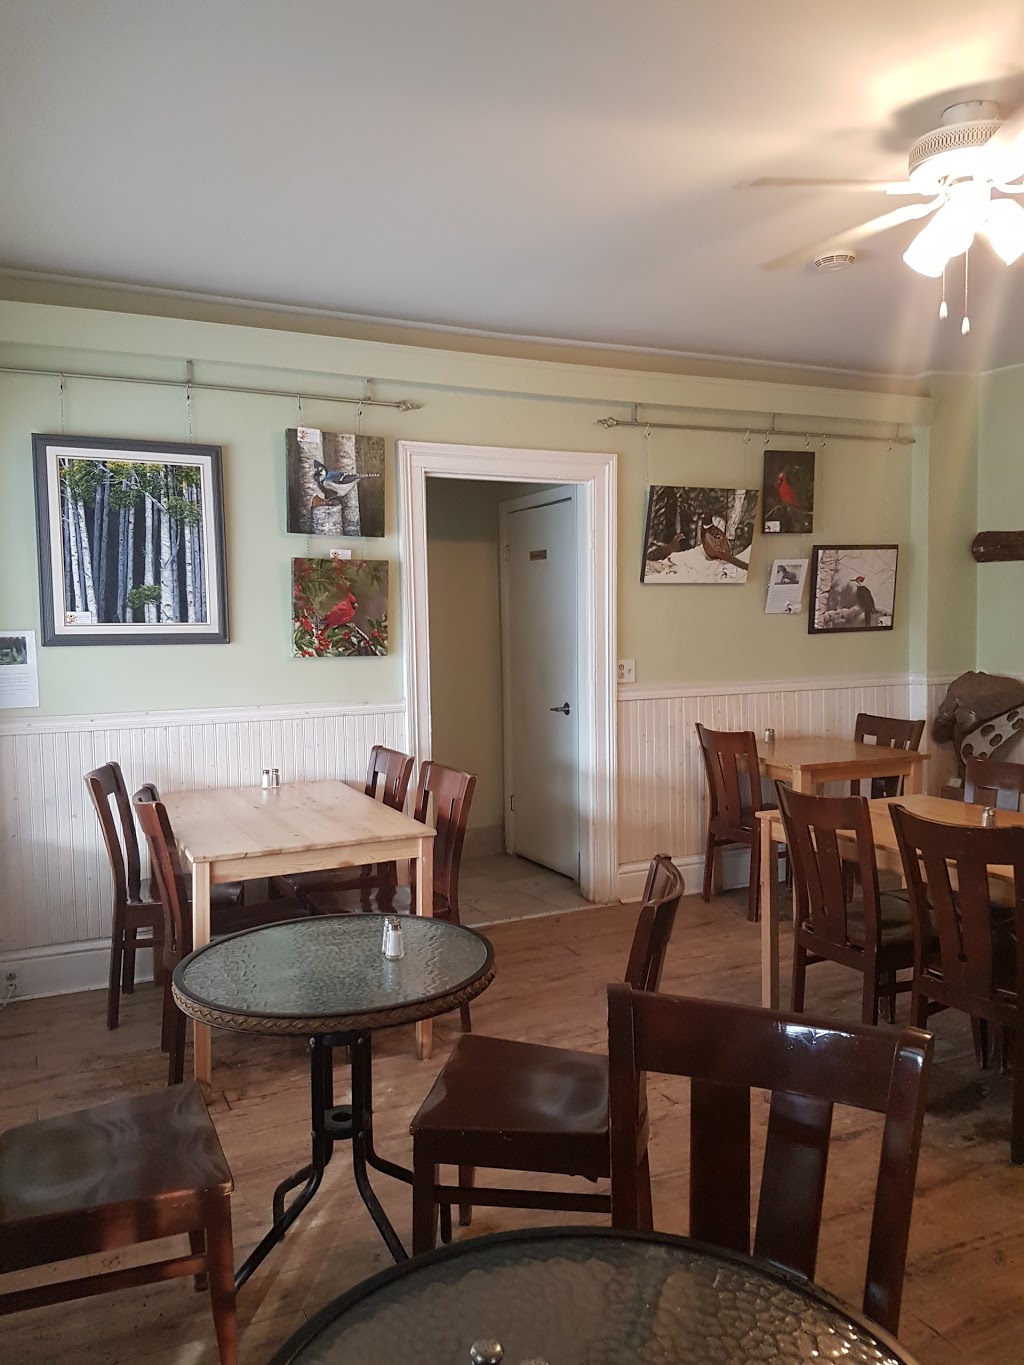 The Nutty Bean Cafe | cafe | 33 Queen St, Lakefield, ON K0L 2H0, Canada | 7056529721 OR +1 705-652-9721